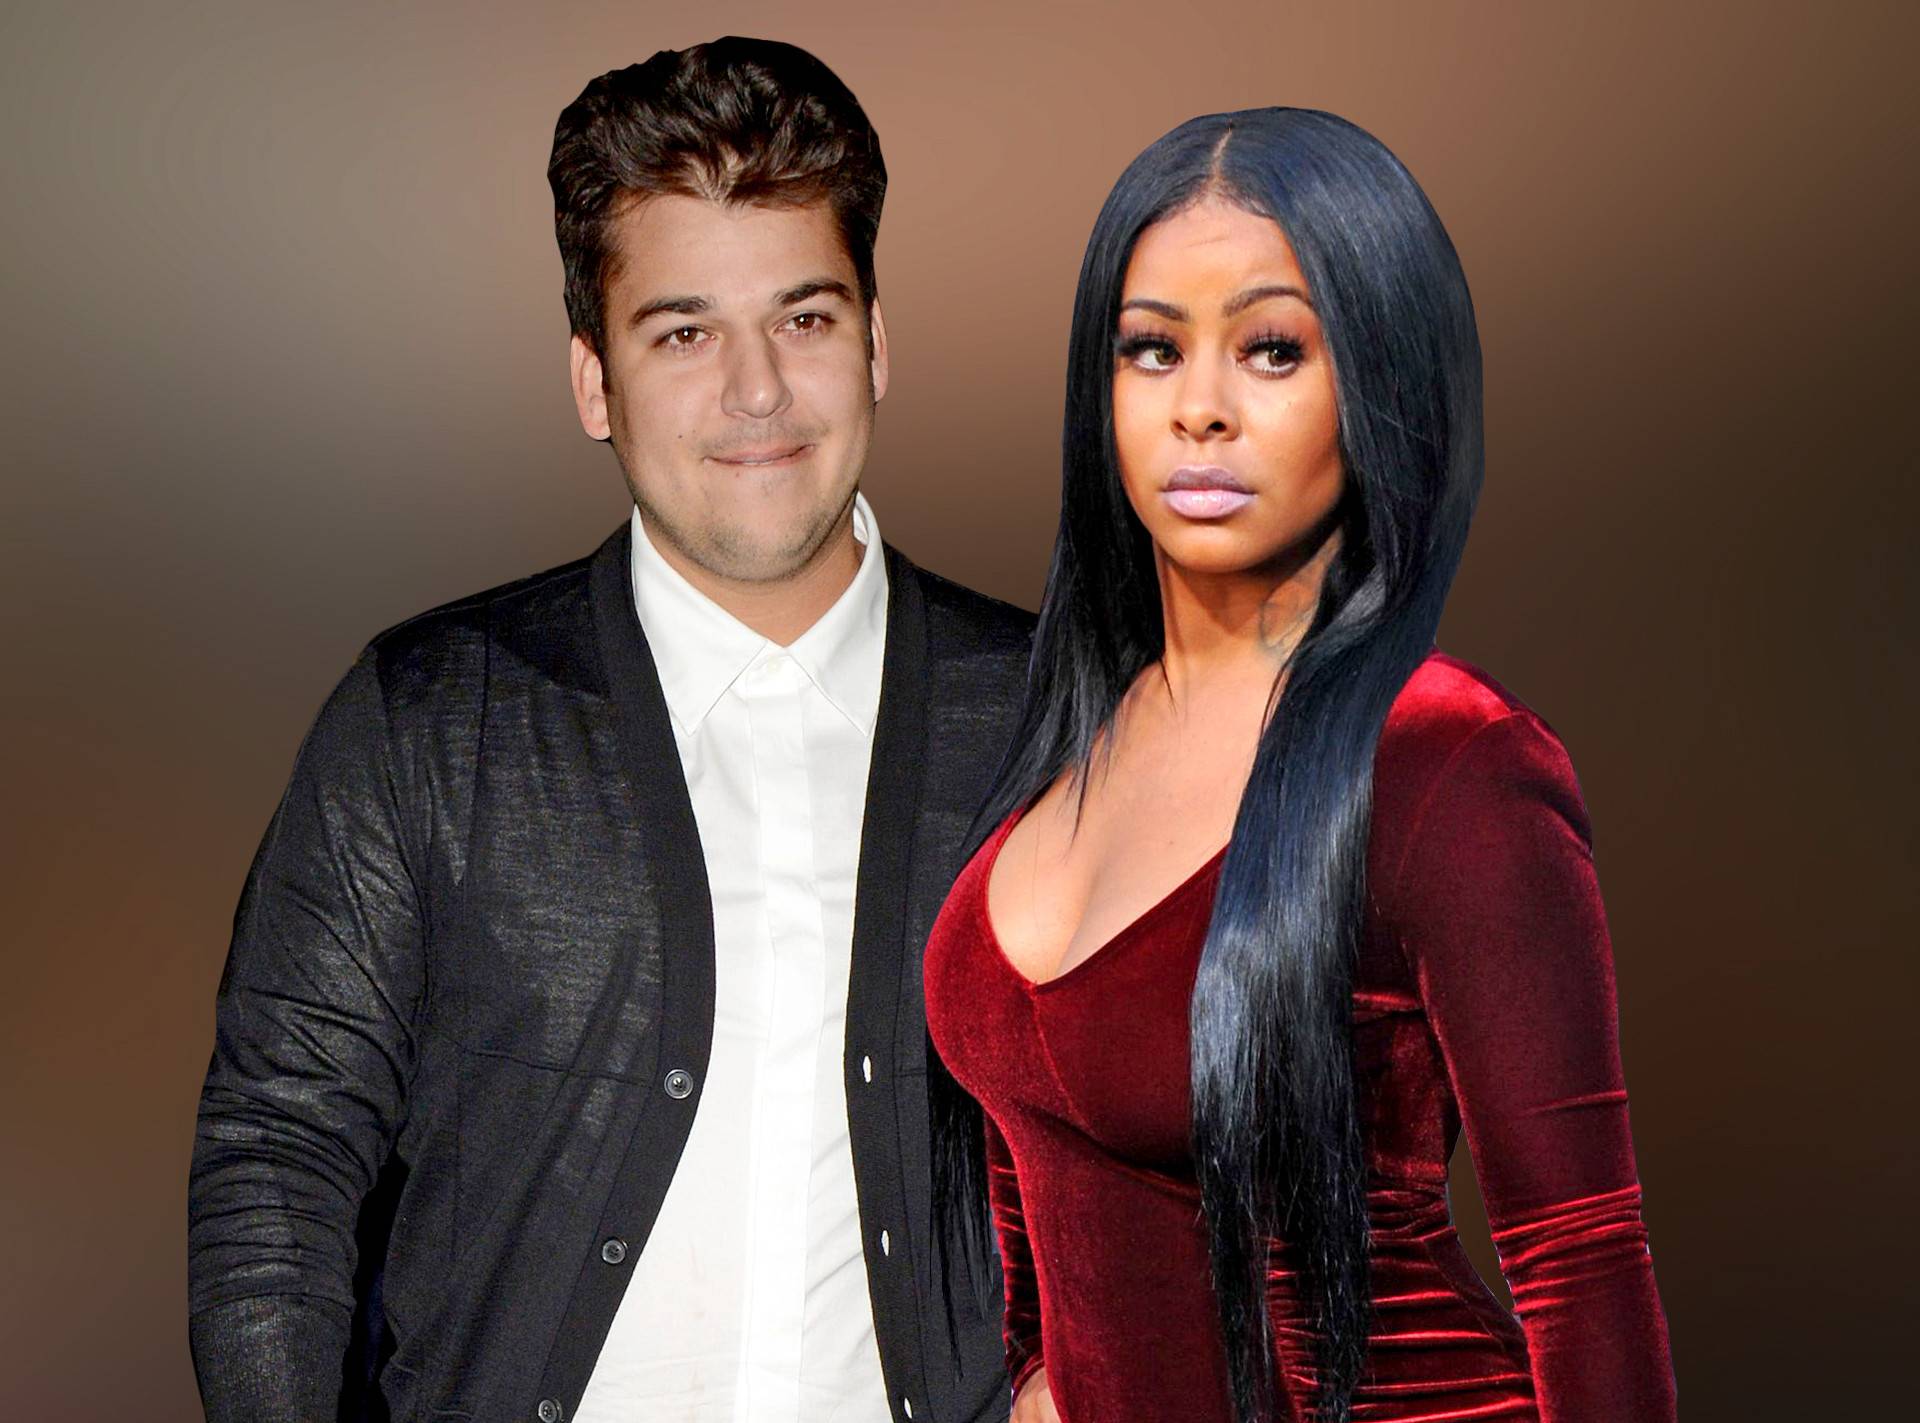 Alexis Skyy Shows Off A Stunning Black Bodysuit After Revealing She's Dating Rob Kardashian - People Say She Looks Like Remy Ma